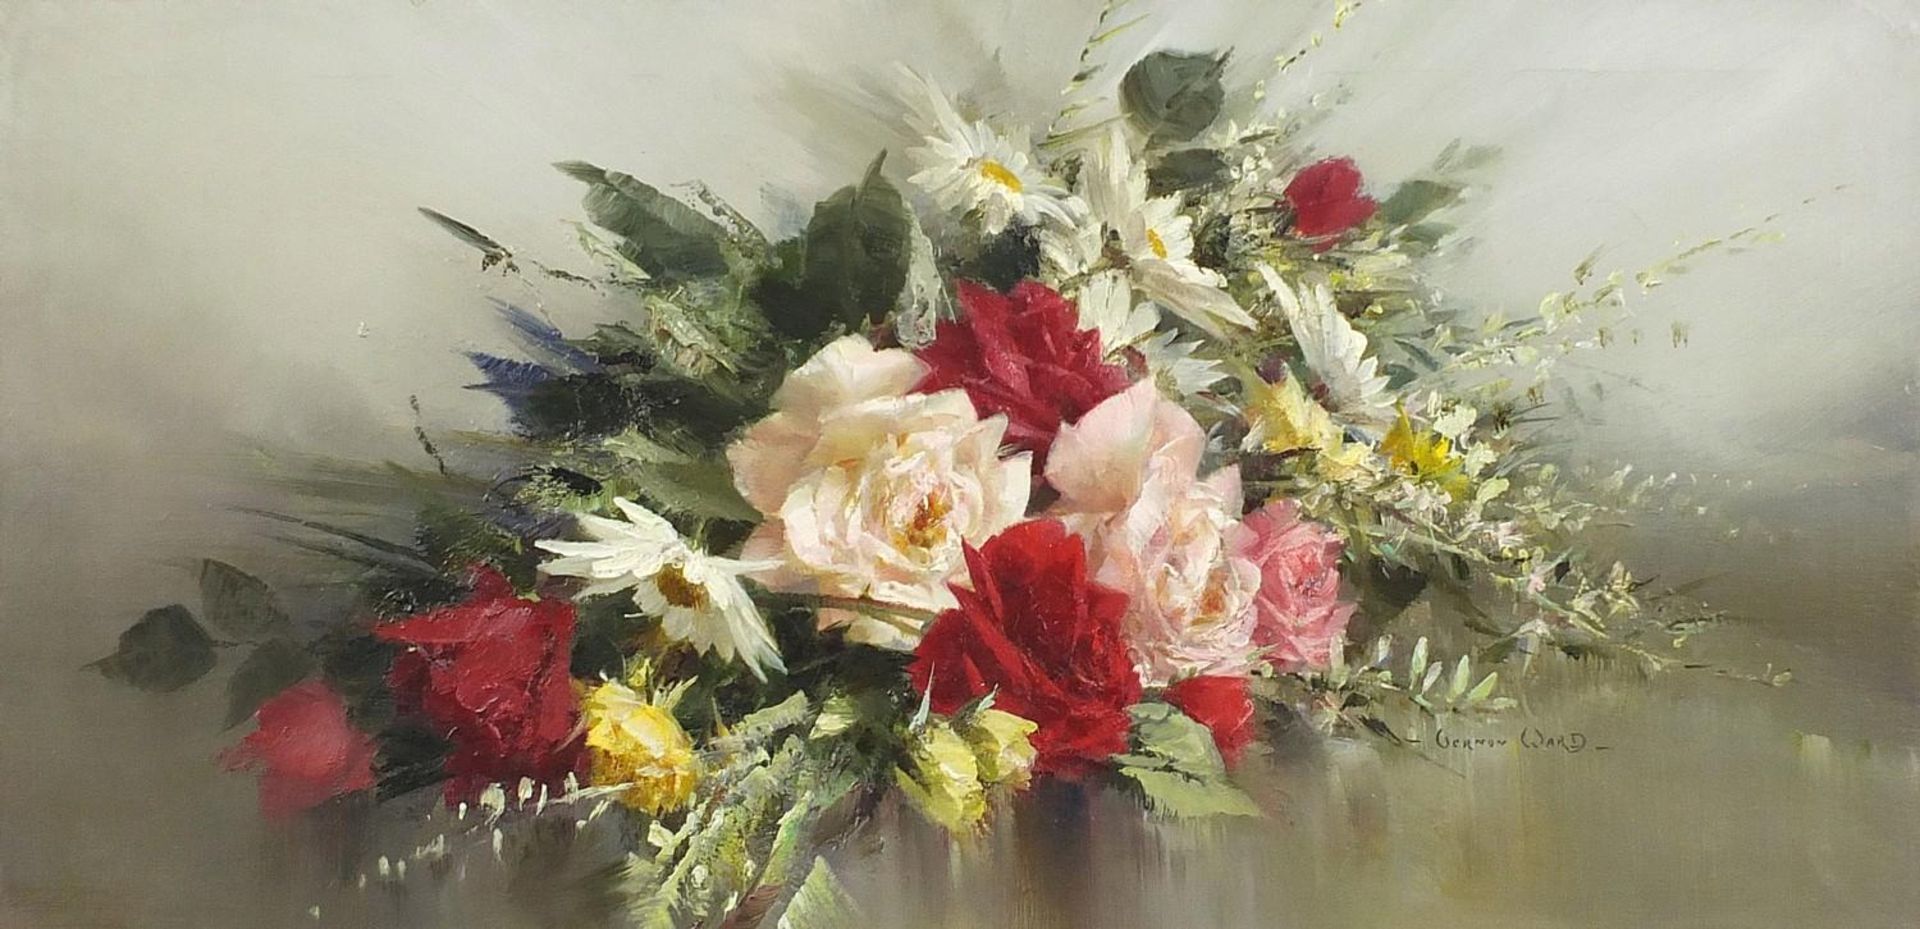 ** WITHDRAWN ** Vernon Ward - Still life flowers, oil on canvas, inscribed From the garden in June